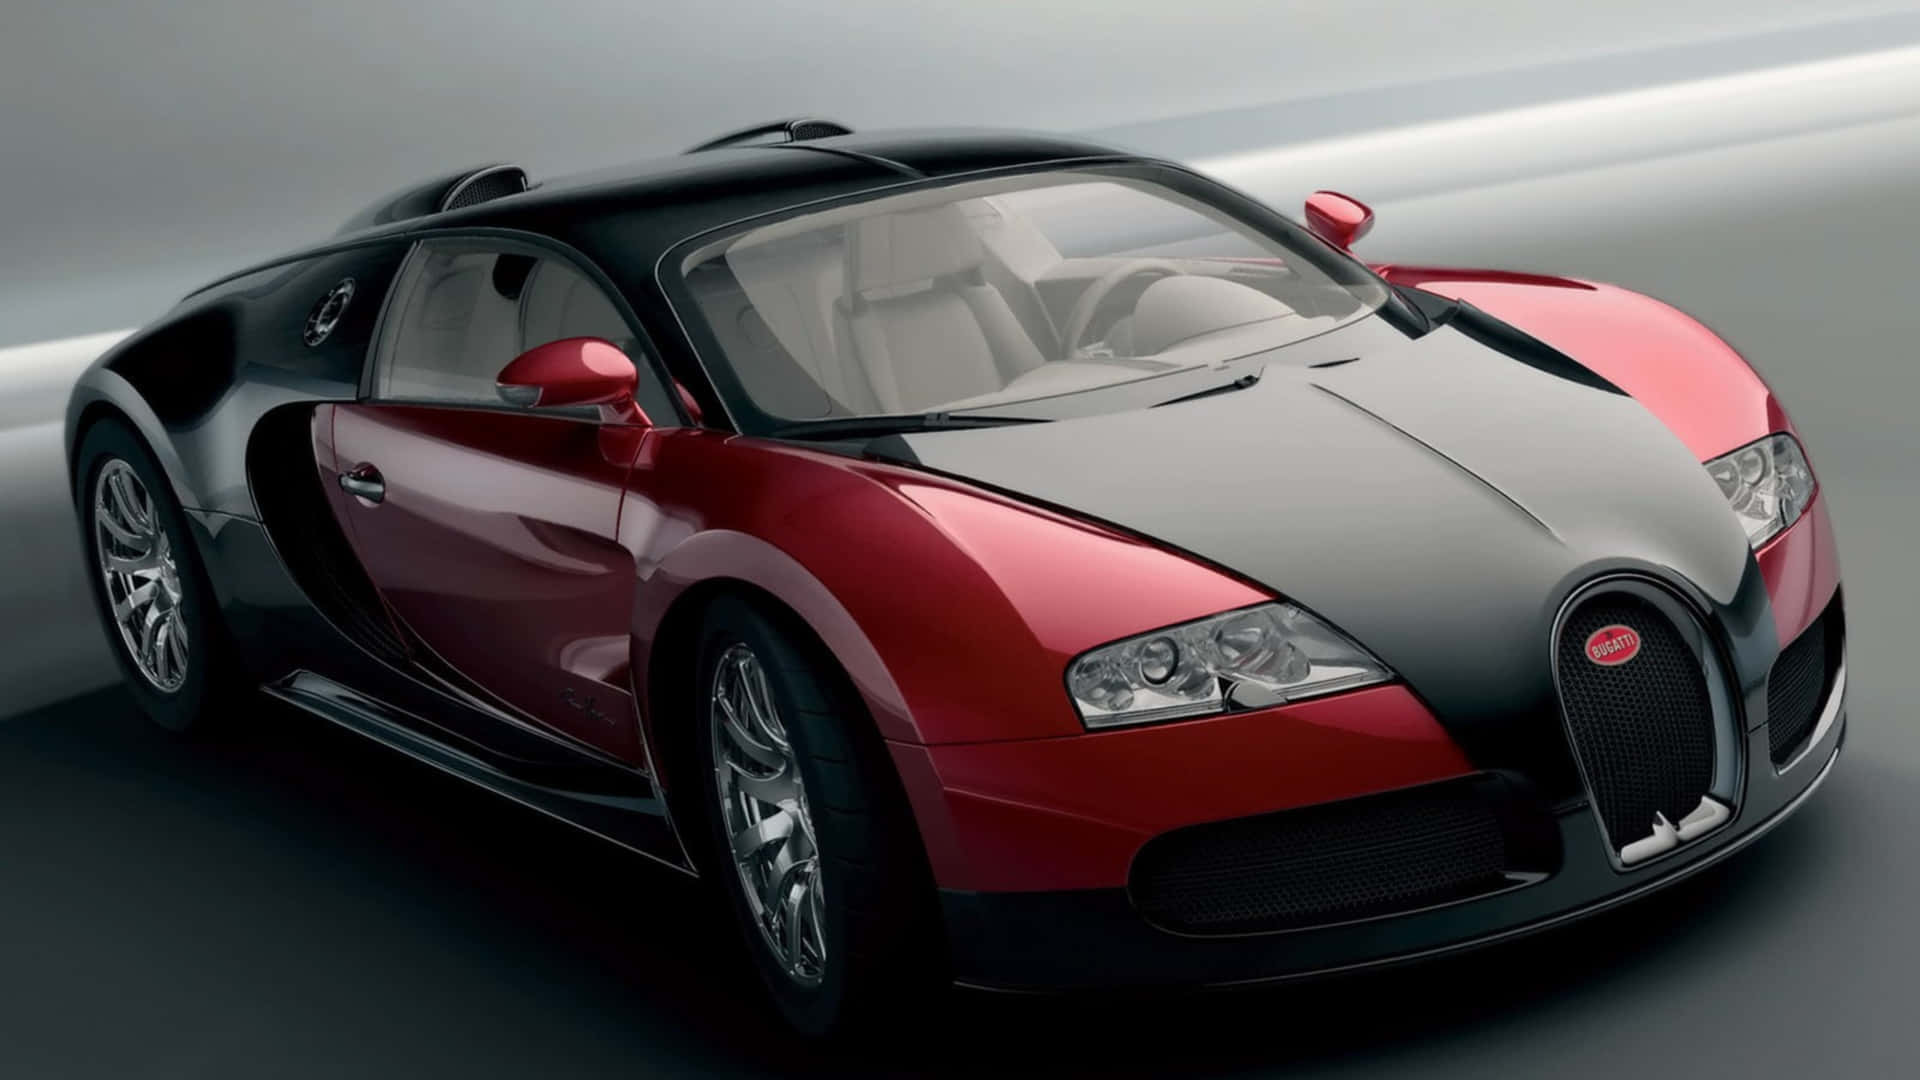 Experience the beauty and power of the luxurious Bugatti Wallpaper